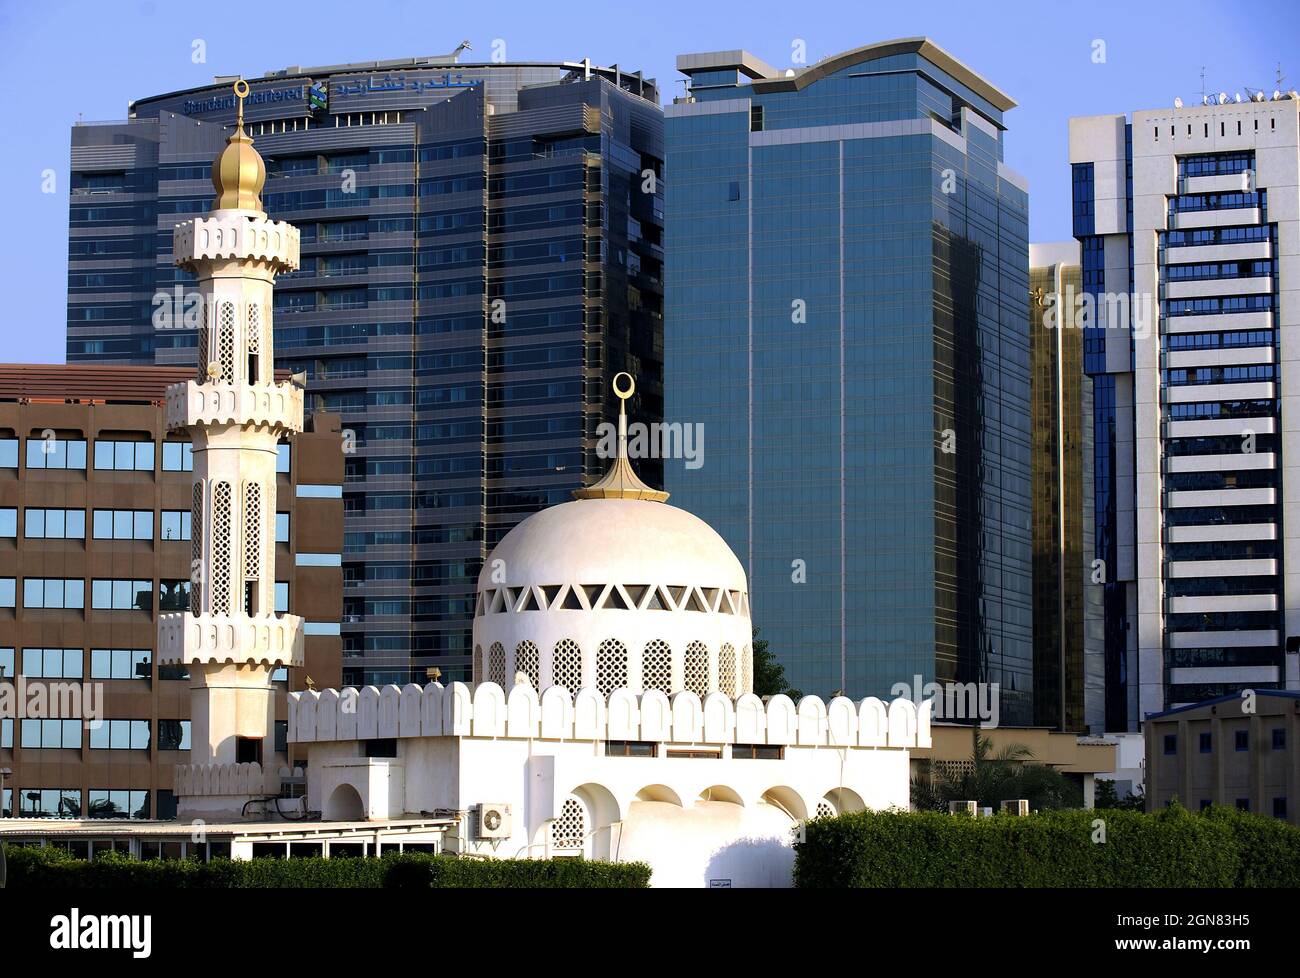 CONTRAST BETWEEN THE MODERN ARCHITECTURE OF THE SKYSCRAPERS AND THE TRADITIONAL MIDDLE EASTERN ARCHITECTURE OF A MOSQUE, ABU DHABI, CAPITAL OF THE UNI Stock Photo